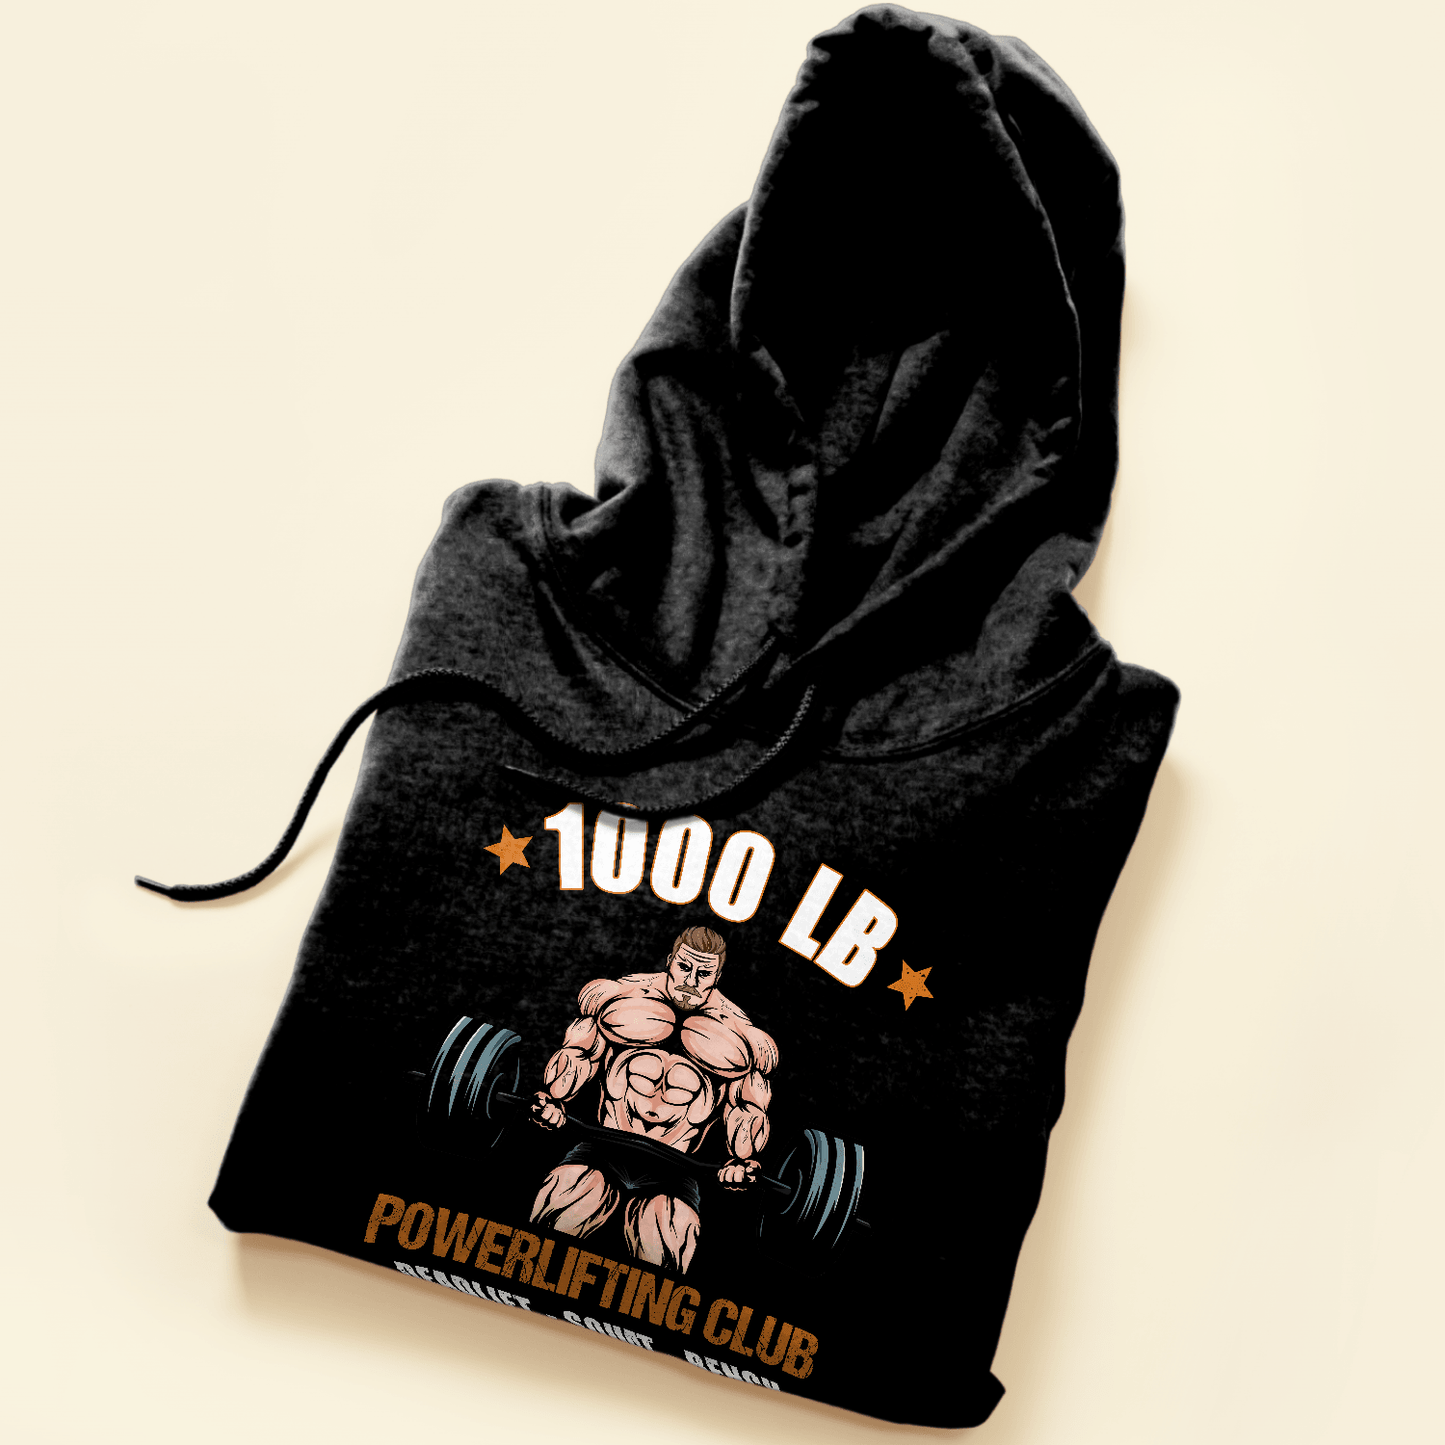 1000 LB Club - Personalized Shirt - Birthday Gift For Powerlifting Lovers